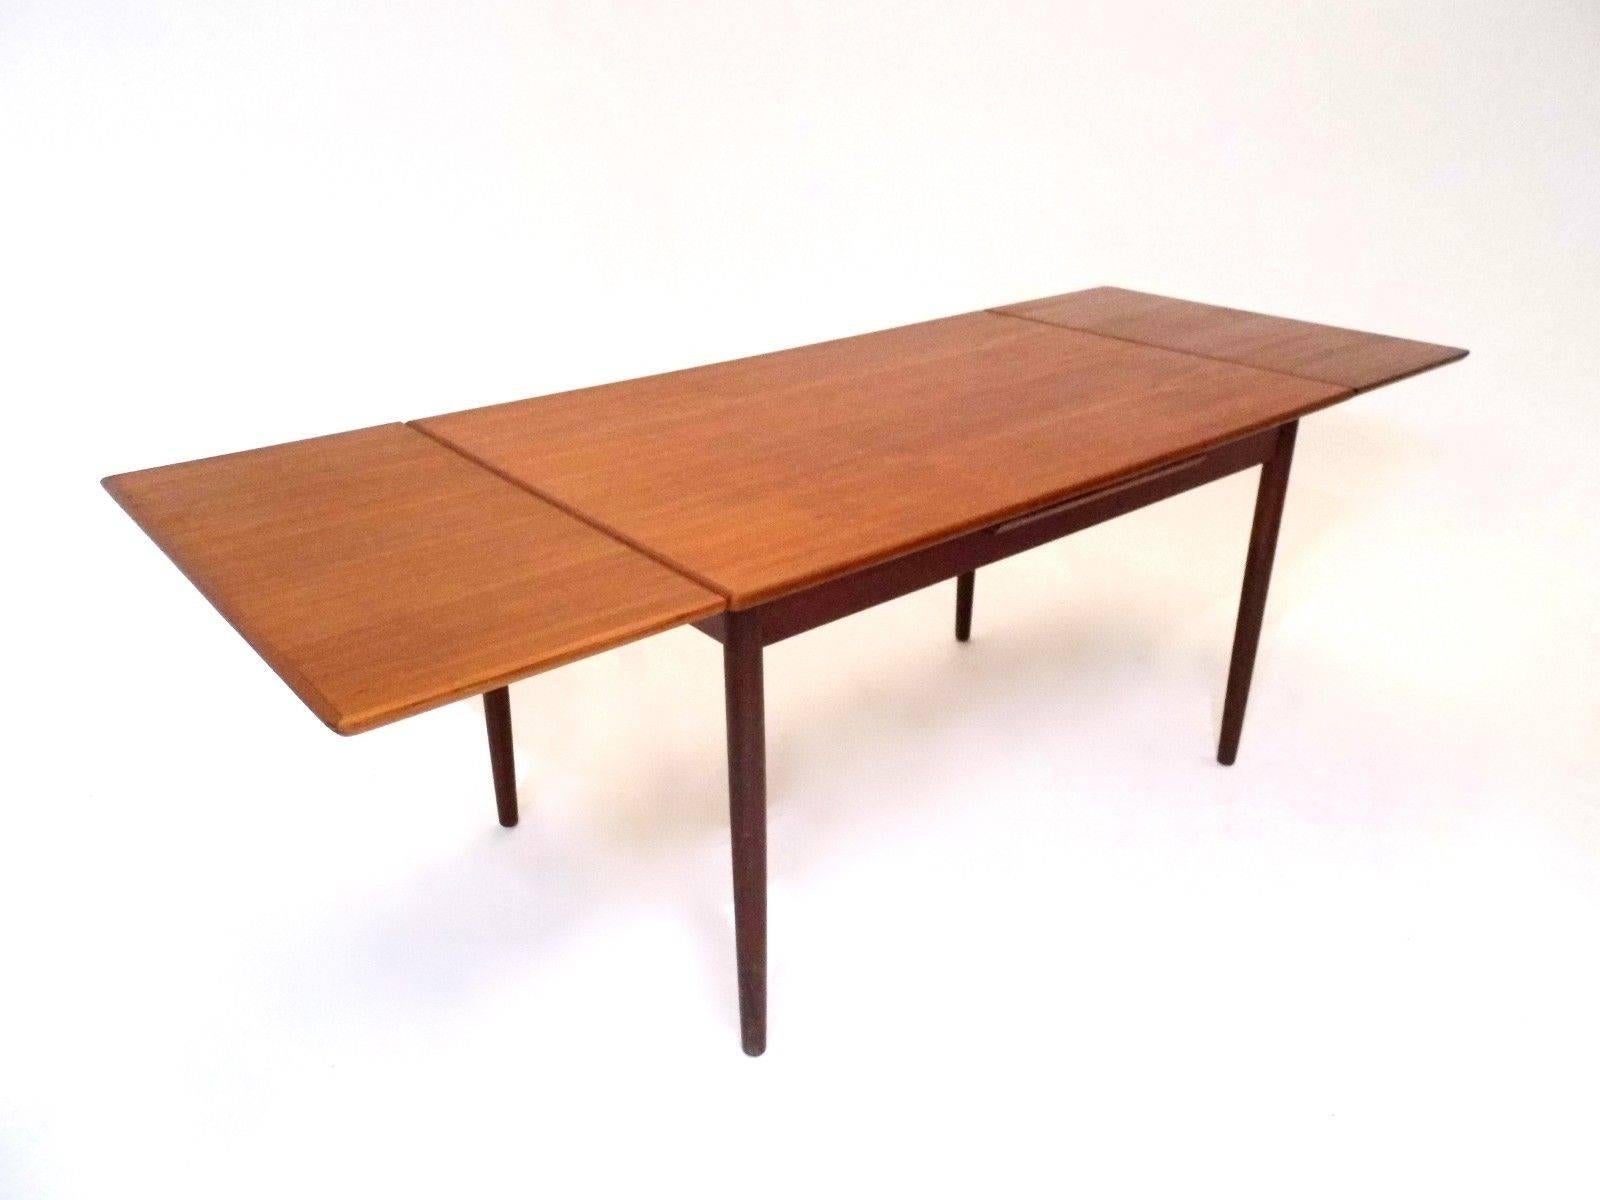 A beautiful Danish teak extending dining table, this would make a stylish addition to any dining area. The table has two extension panels which fit discreetly below the top panel and can be pulled out when needed. A striking piece of classically